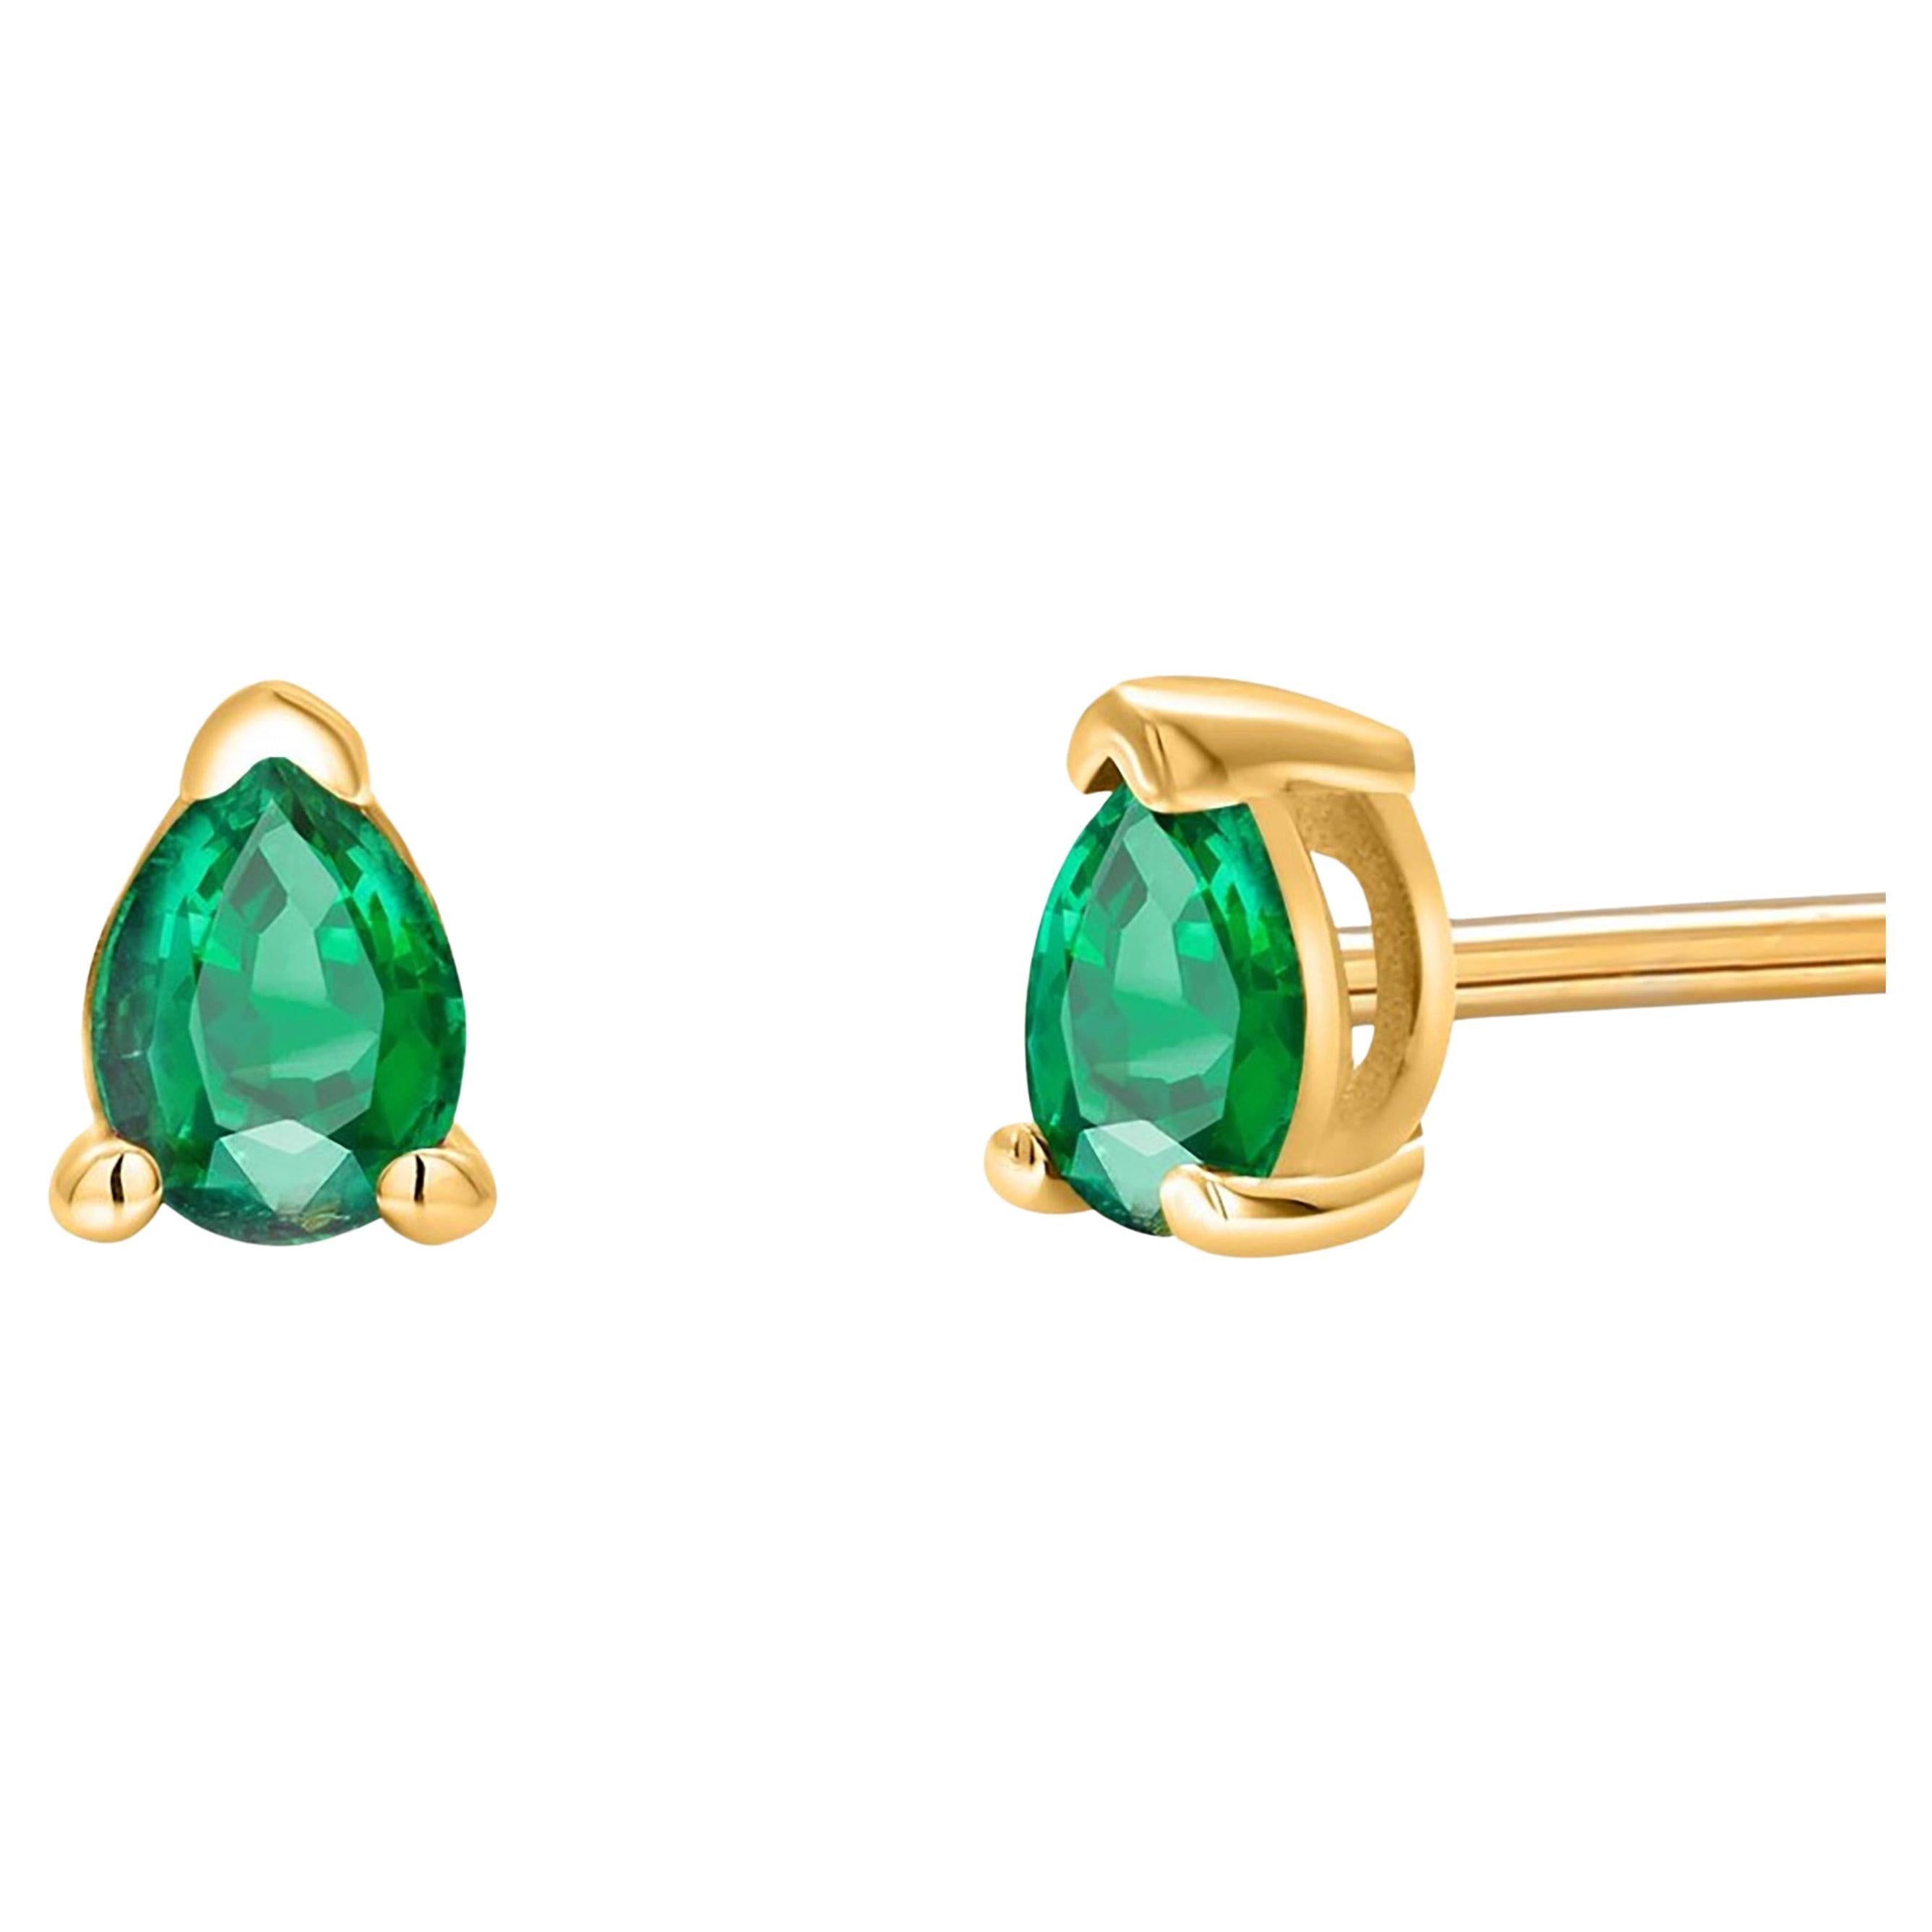 Matched Pair Pear Shaped Emerald 0.45 Carat Yellow Gold 0.20 Inch Stud Earrings